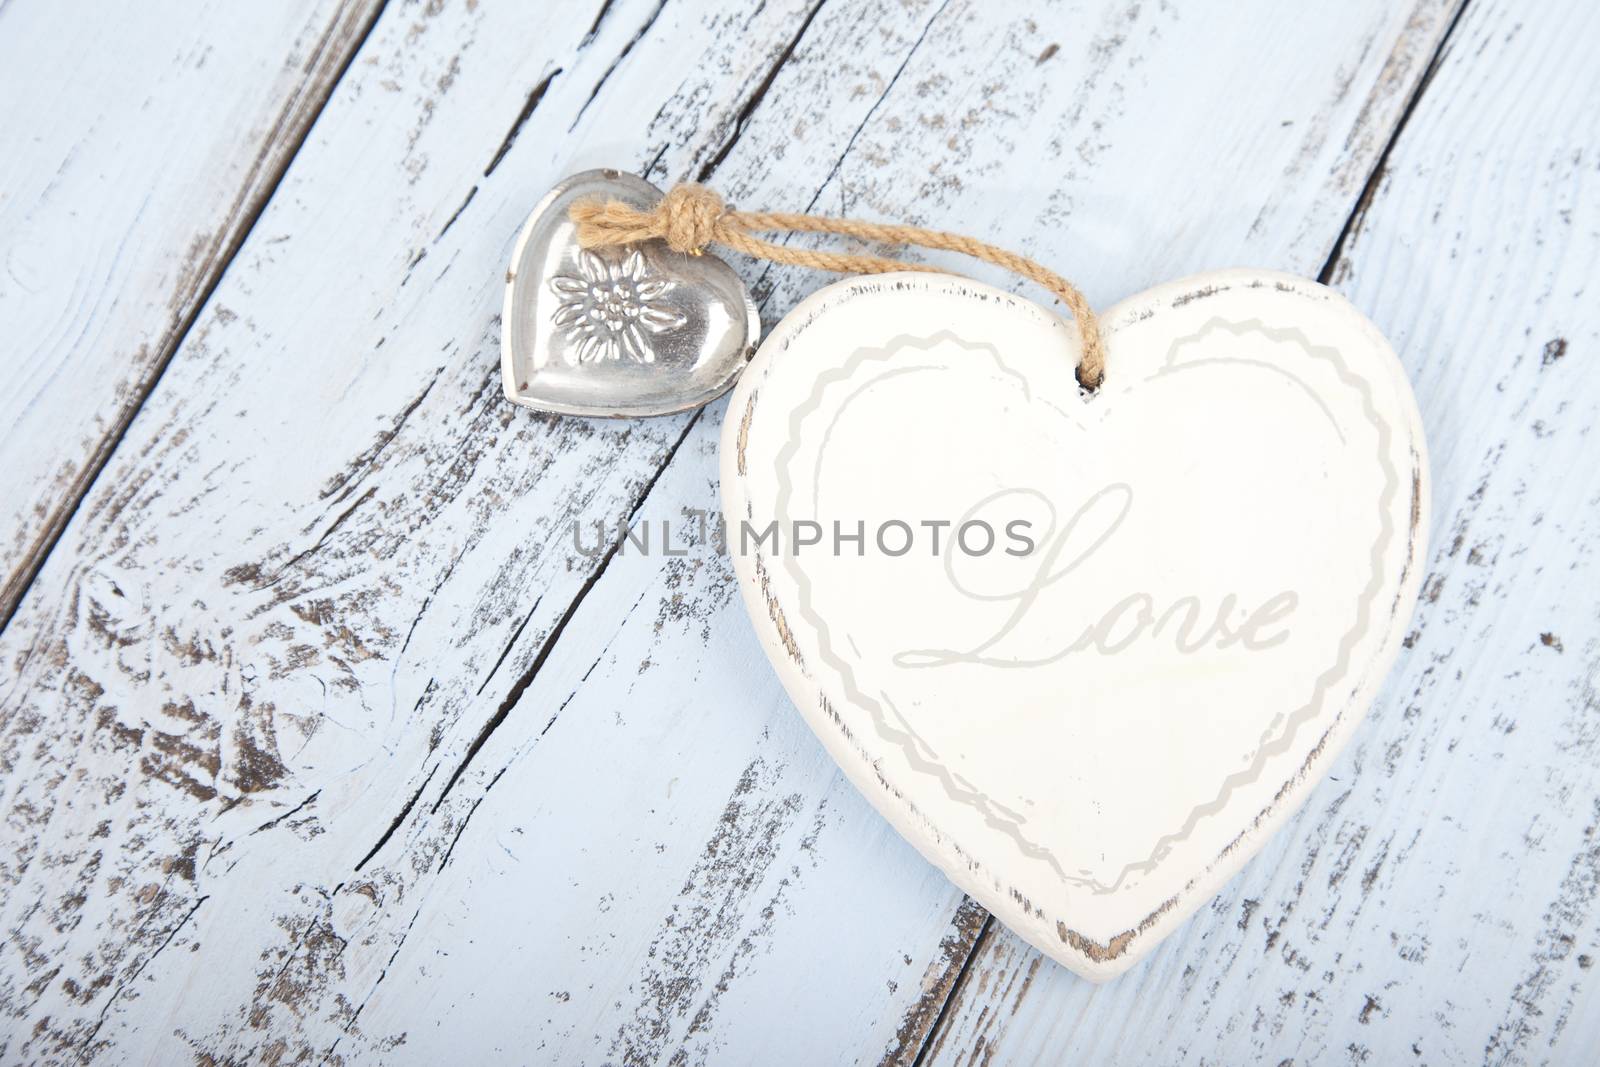 White heart with text Love on light blue wooden background